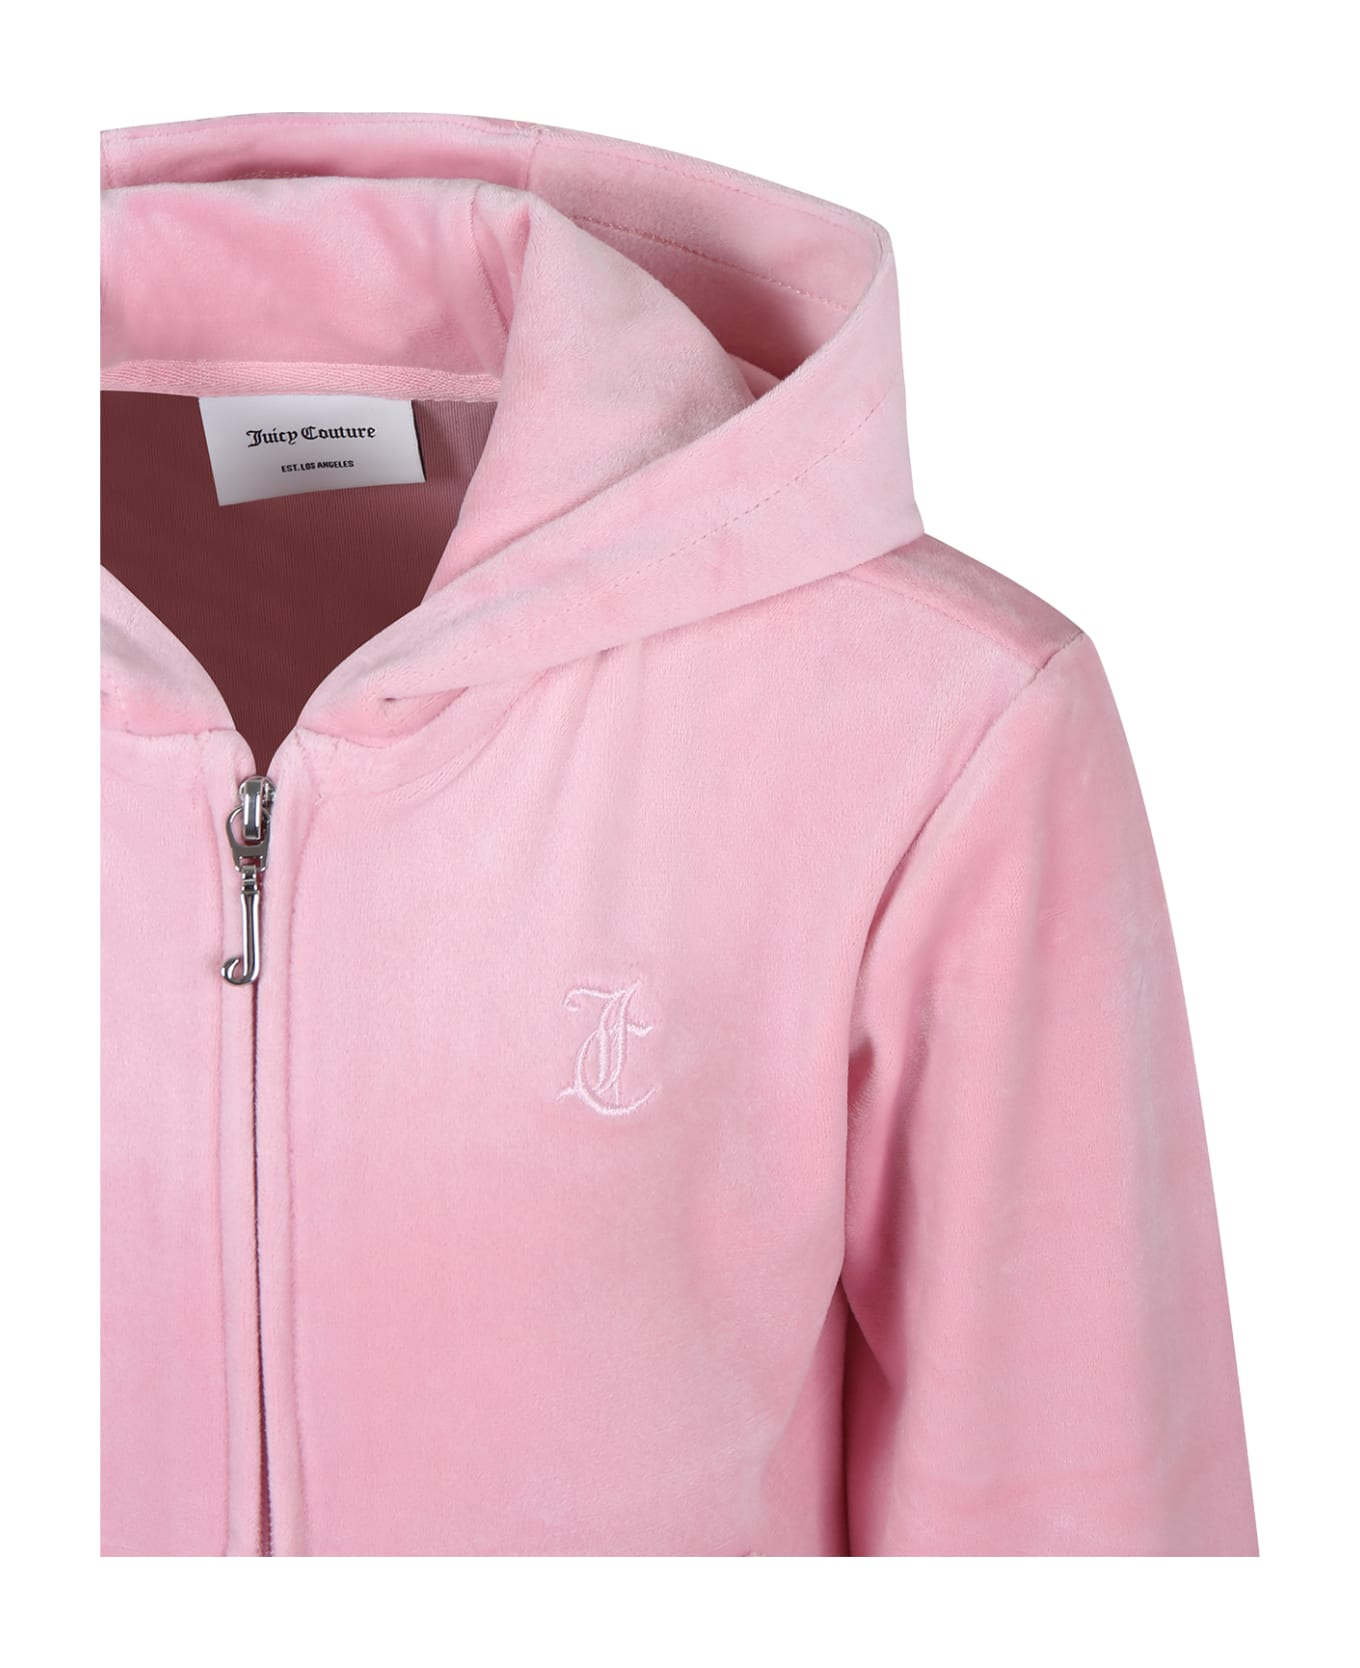 Juicy Couture Pink Sweatshirt For Girl With Logo - Pink